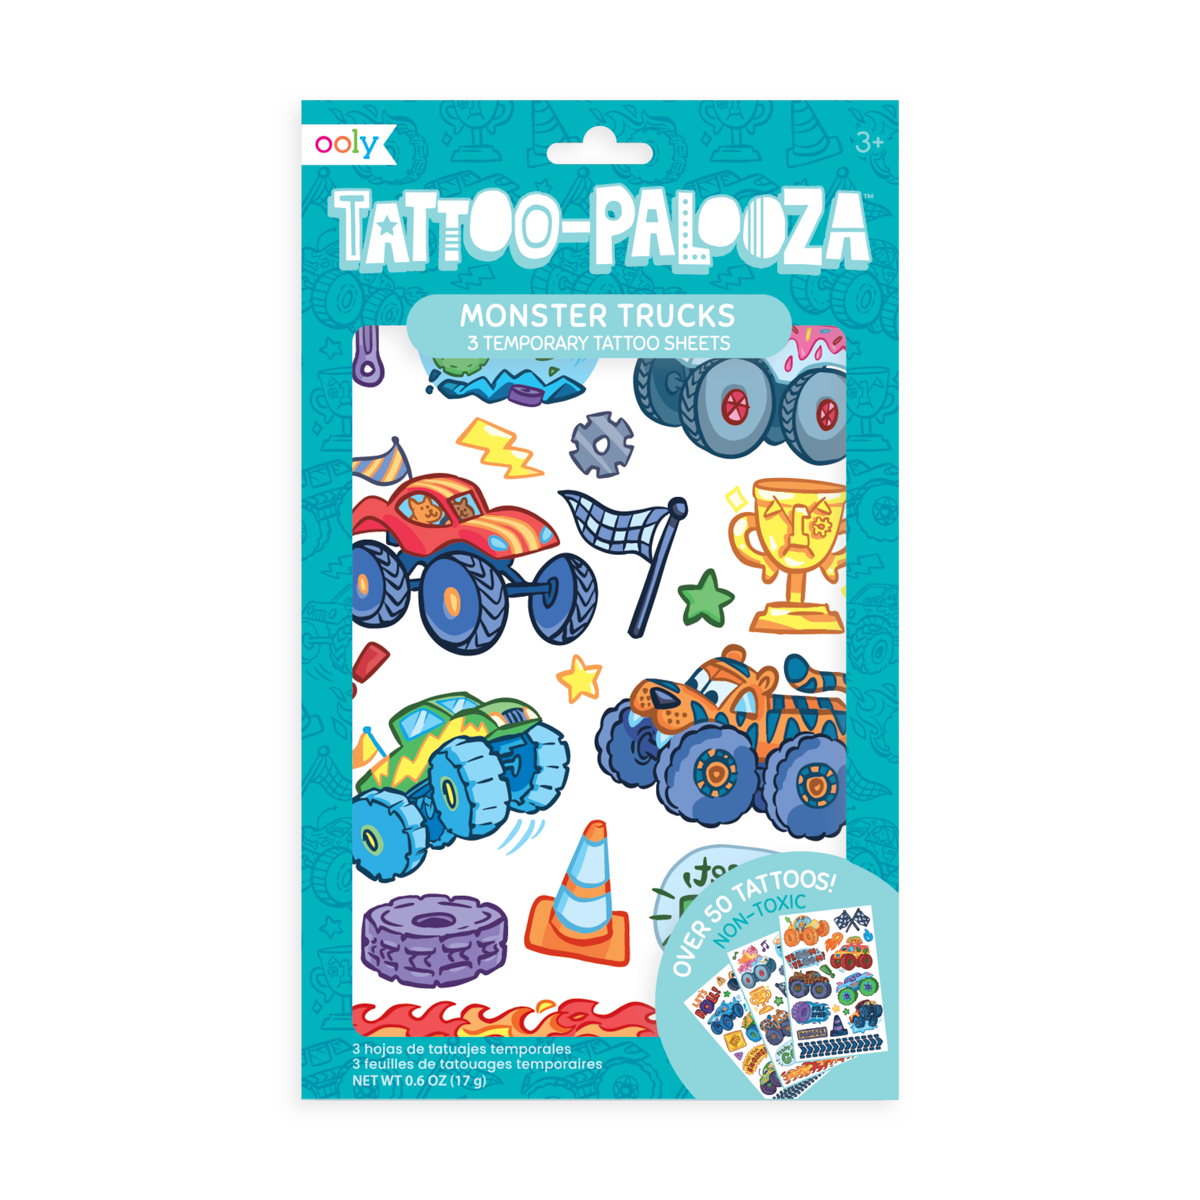 OOLY Tattoo-Palooza Temporary Tattoos - Monster Truck  in packaging